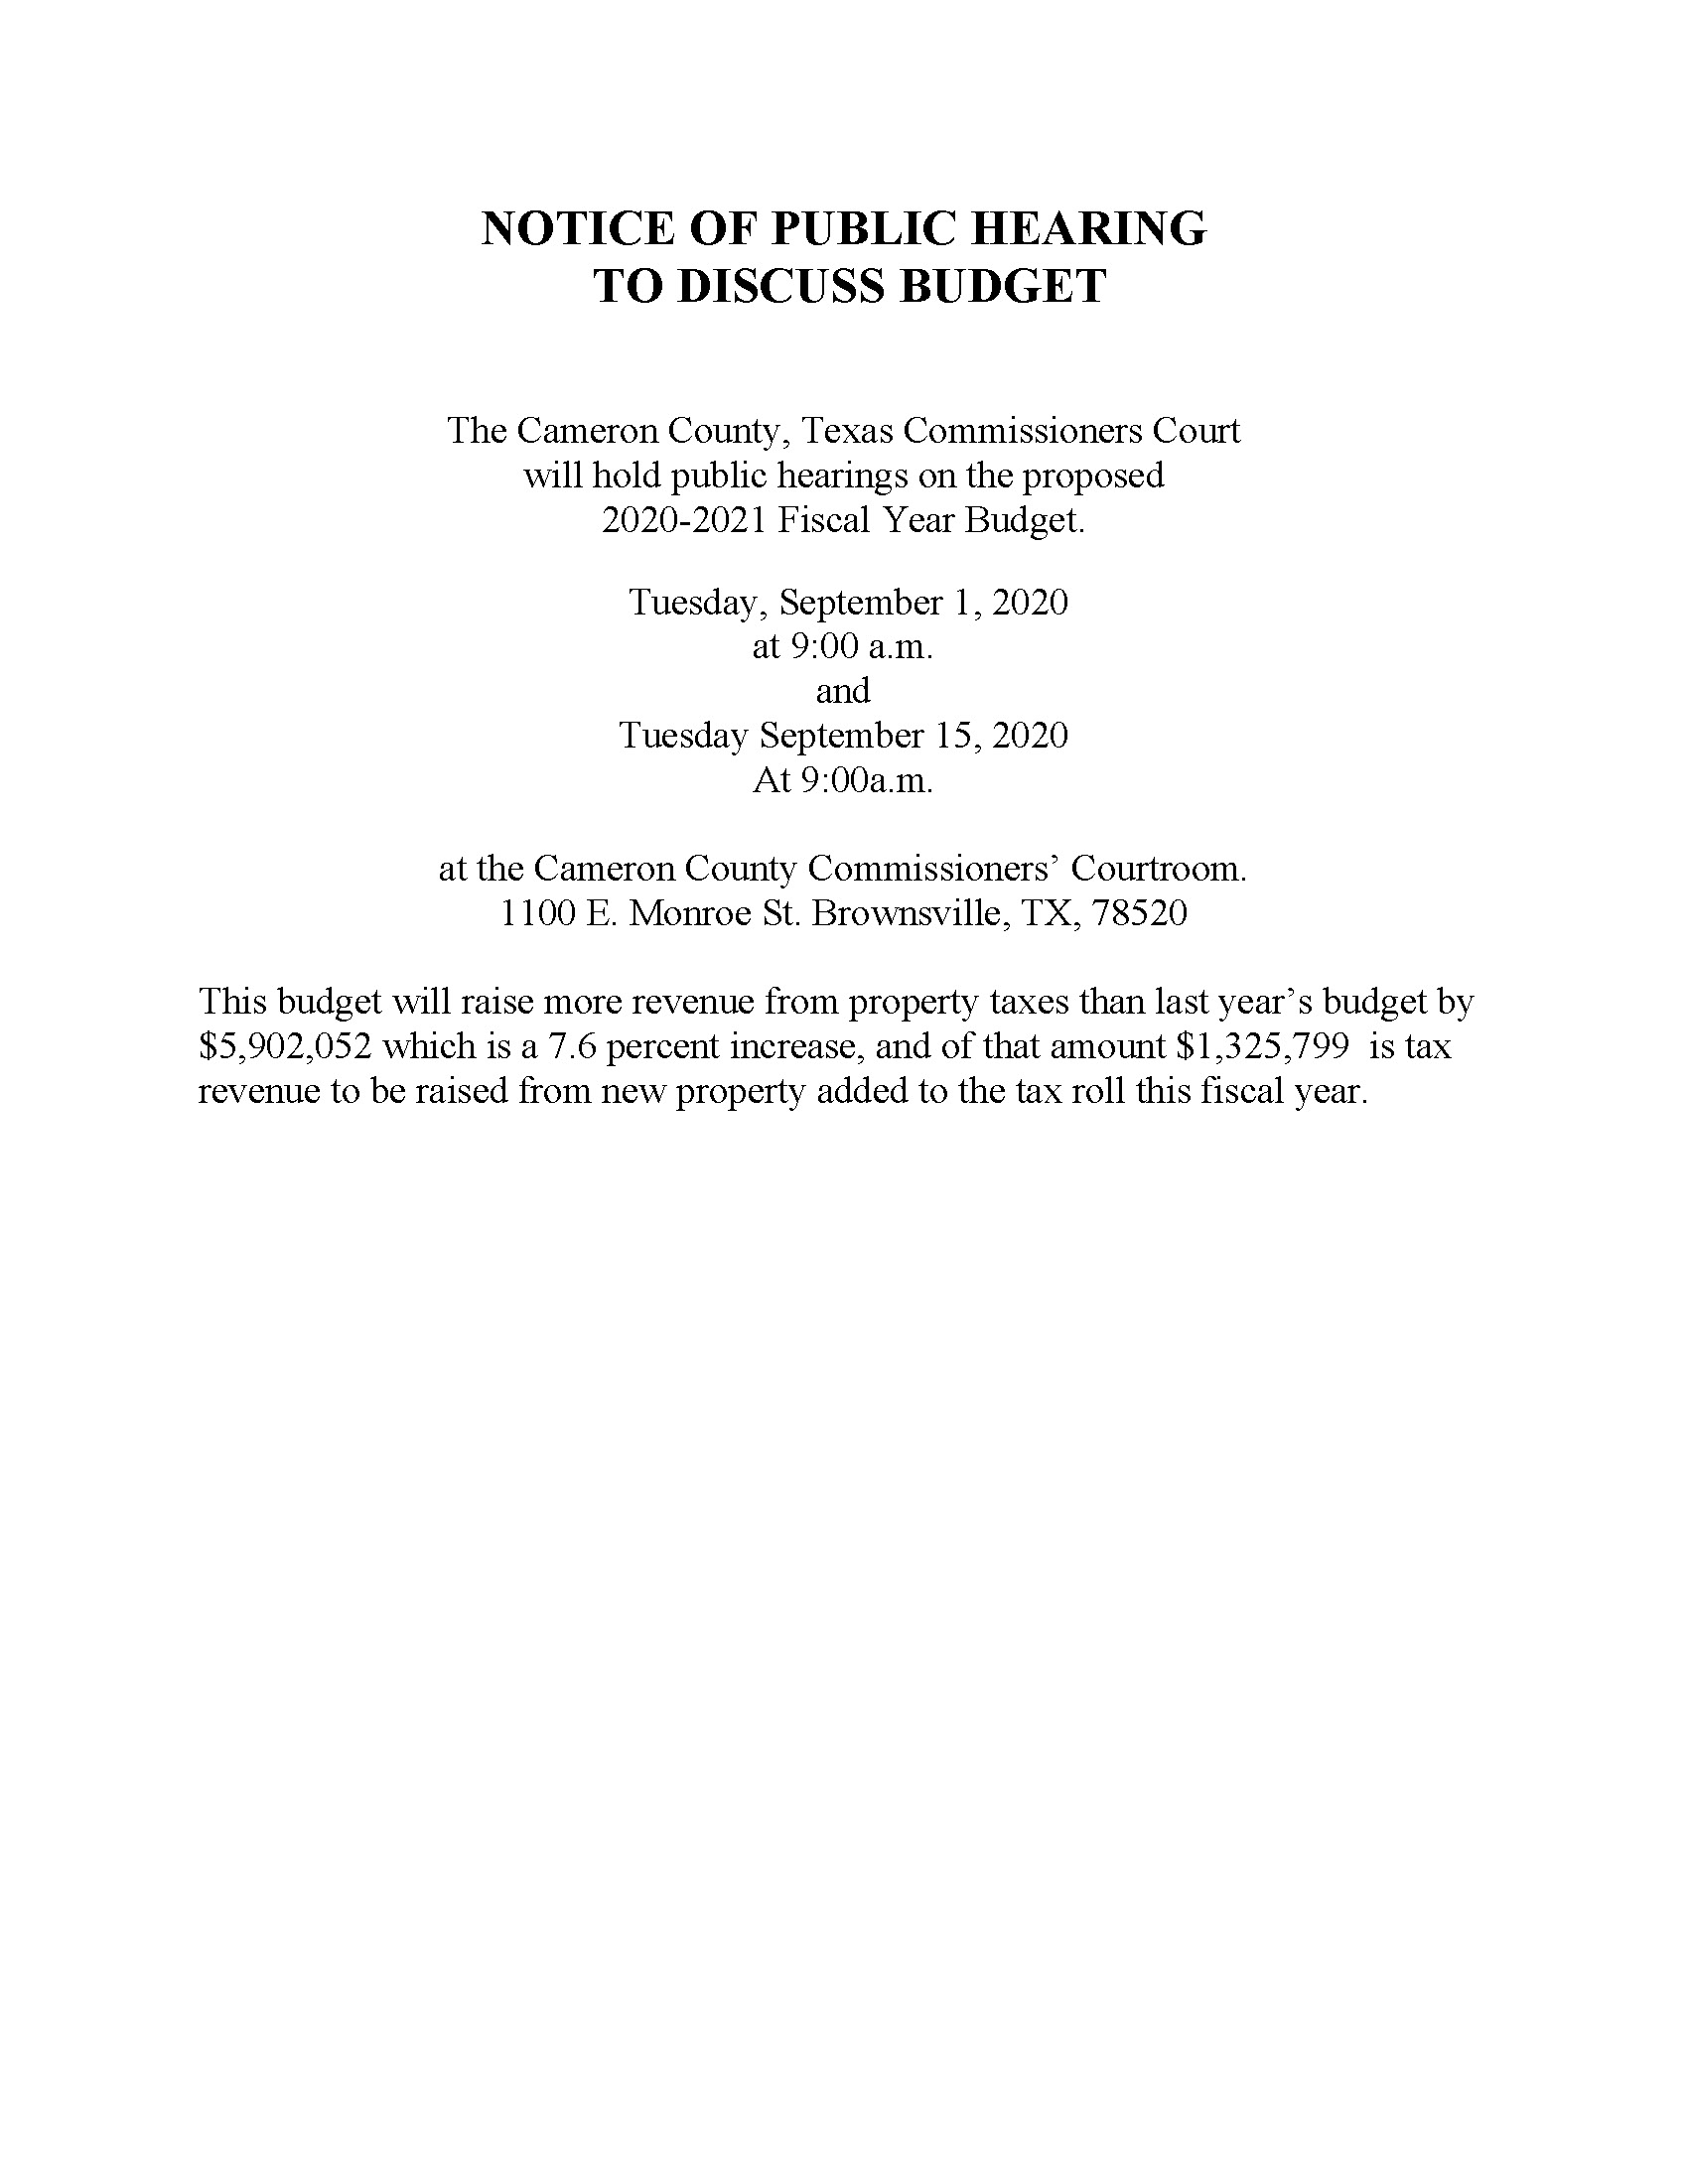 NOTICE OF PUBLIC HEARING BUDGET 2020